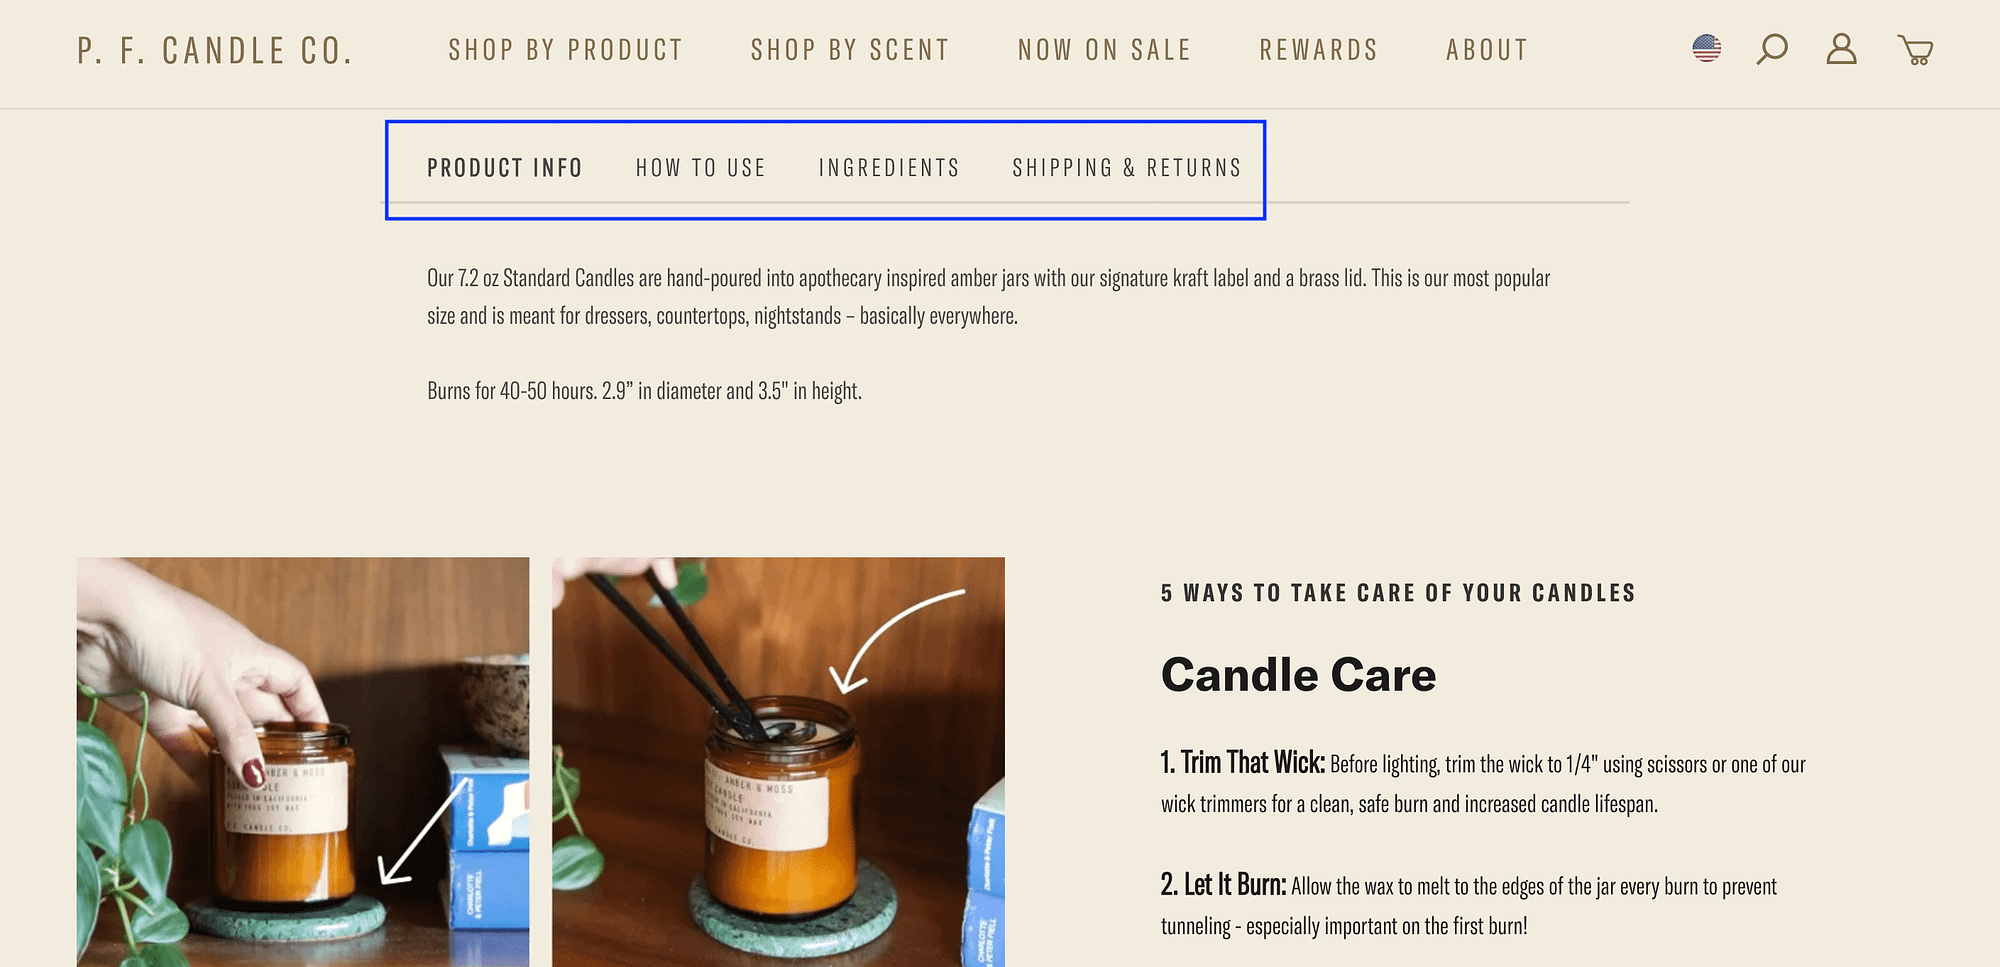 An example of the structure of a product description template on the P.F. Candle Co. website.